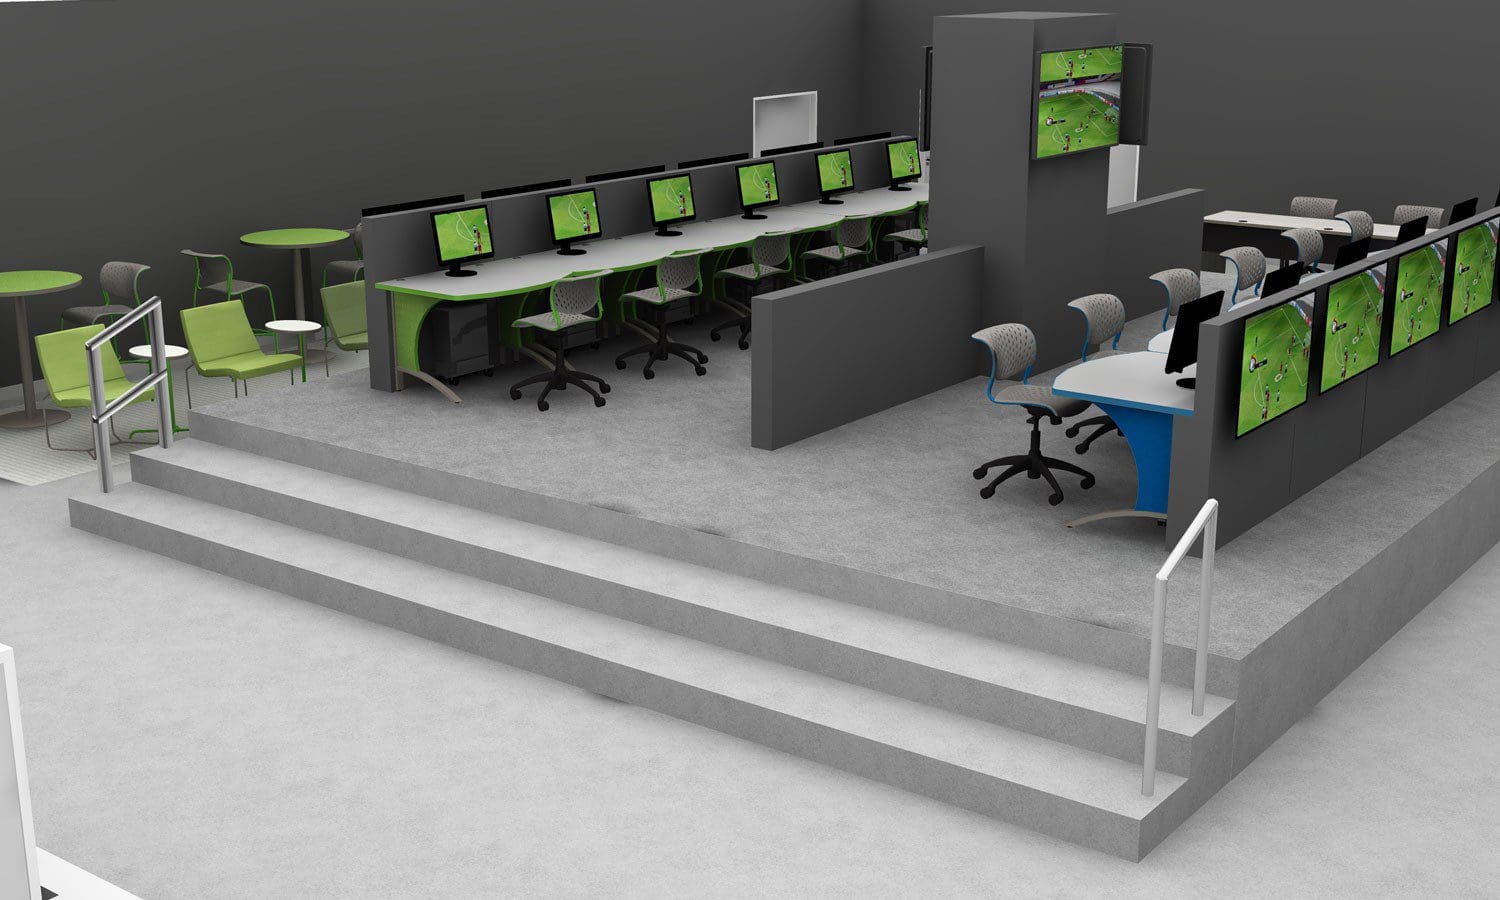 A computer room with green chairs and tables.